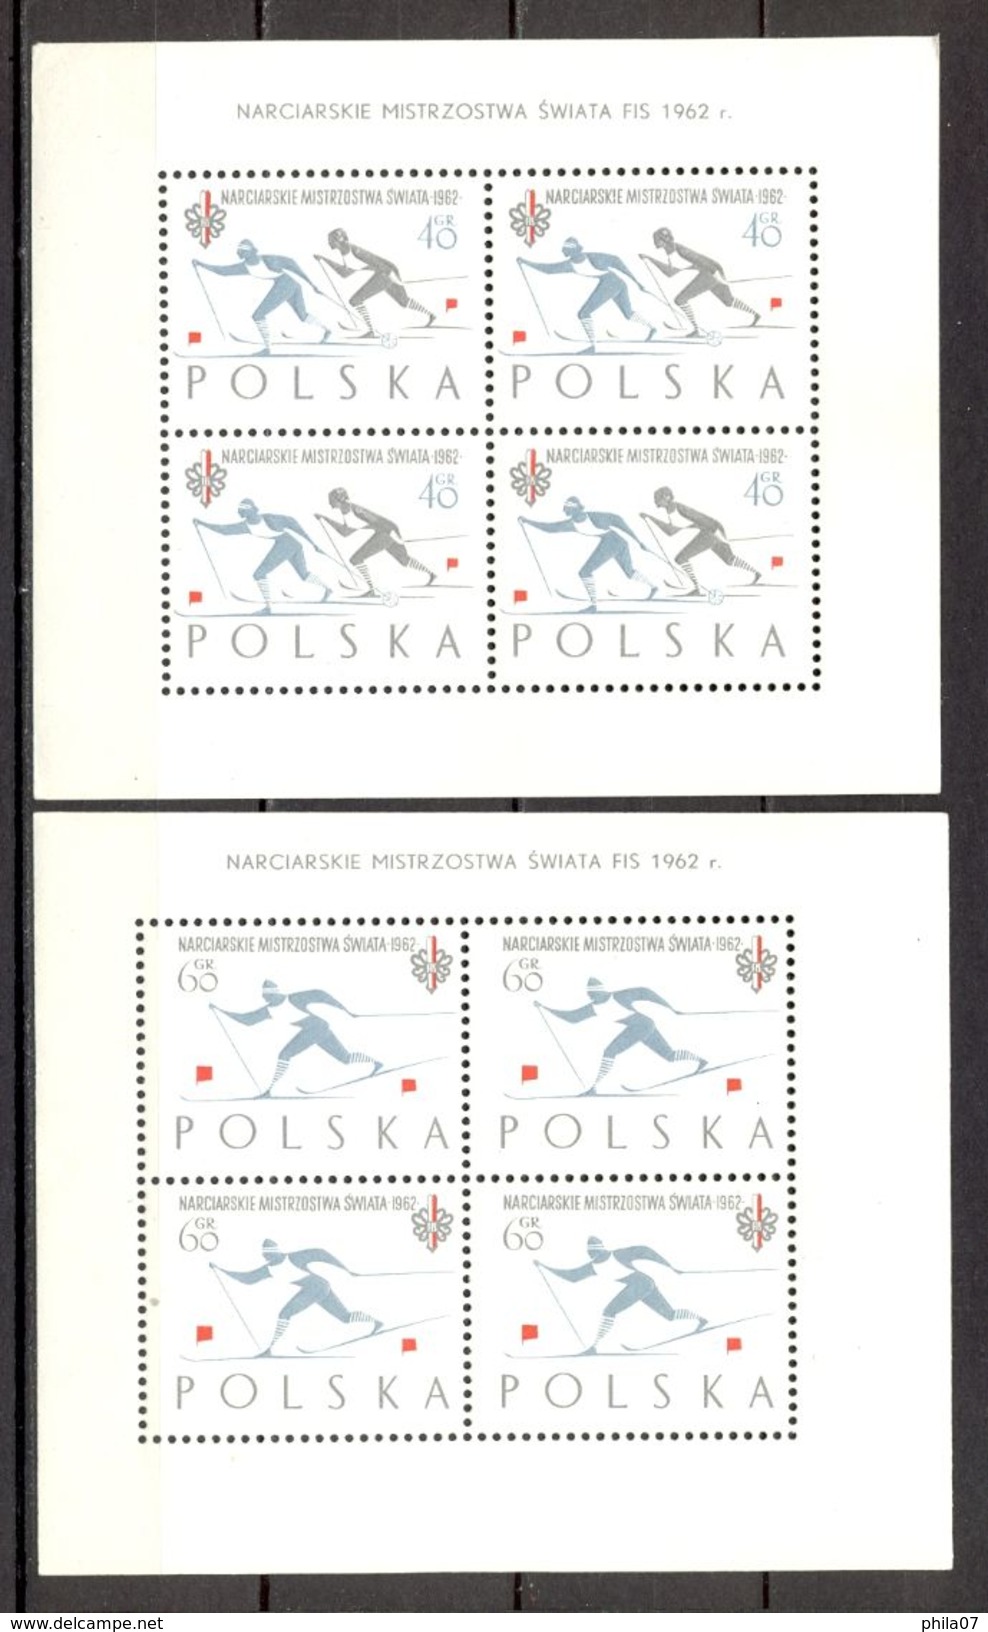 Poland - 1962, SWIATA FIS, Two Blocks, Sheet And Series, All MNH. / See Scans, 5 Scans - Ongebruikt